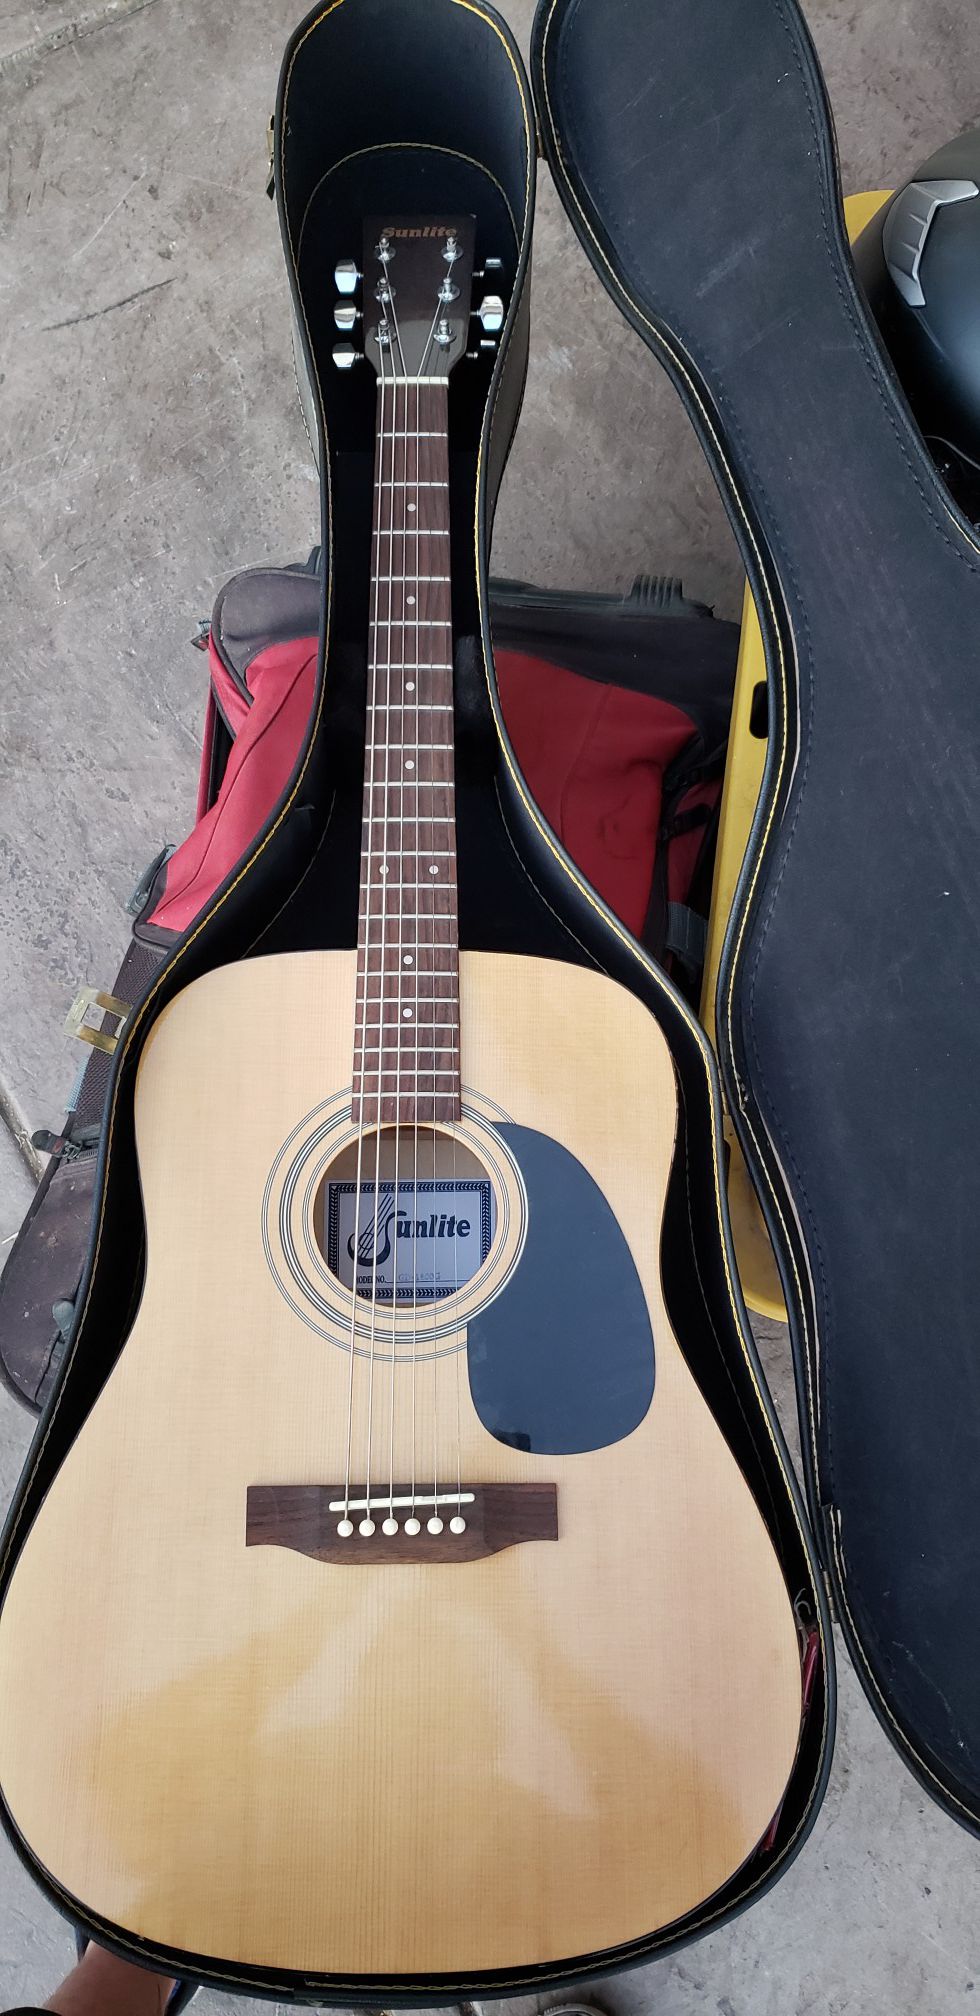 Sunlite Acoustic Guitar and Case